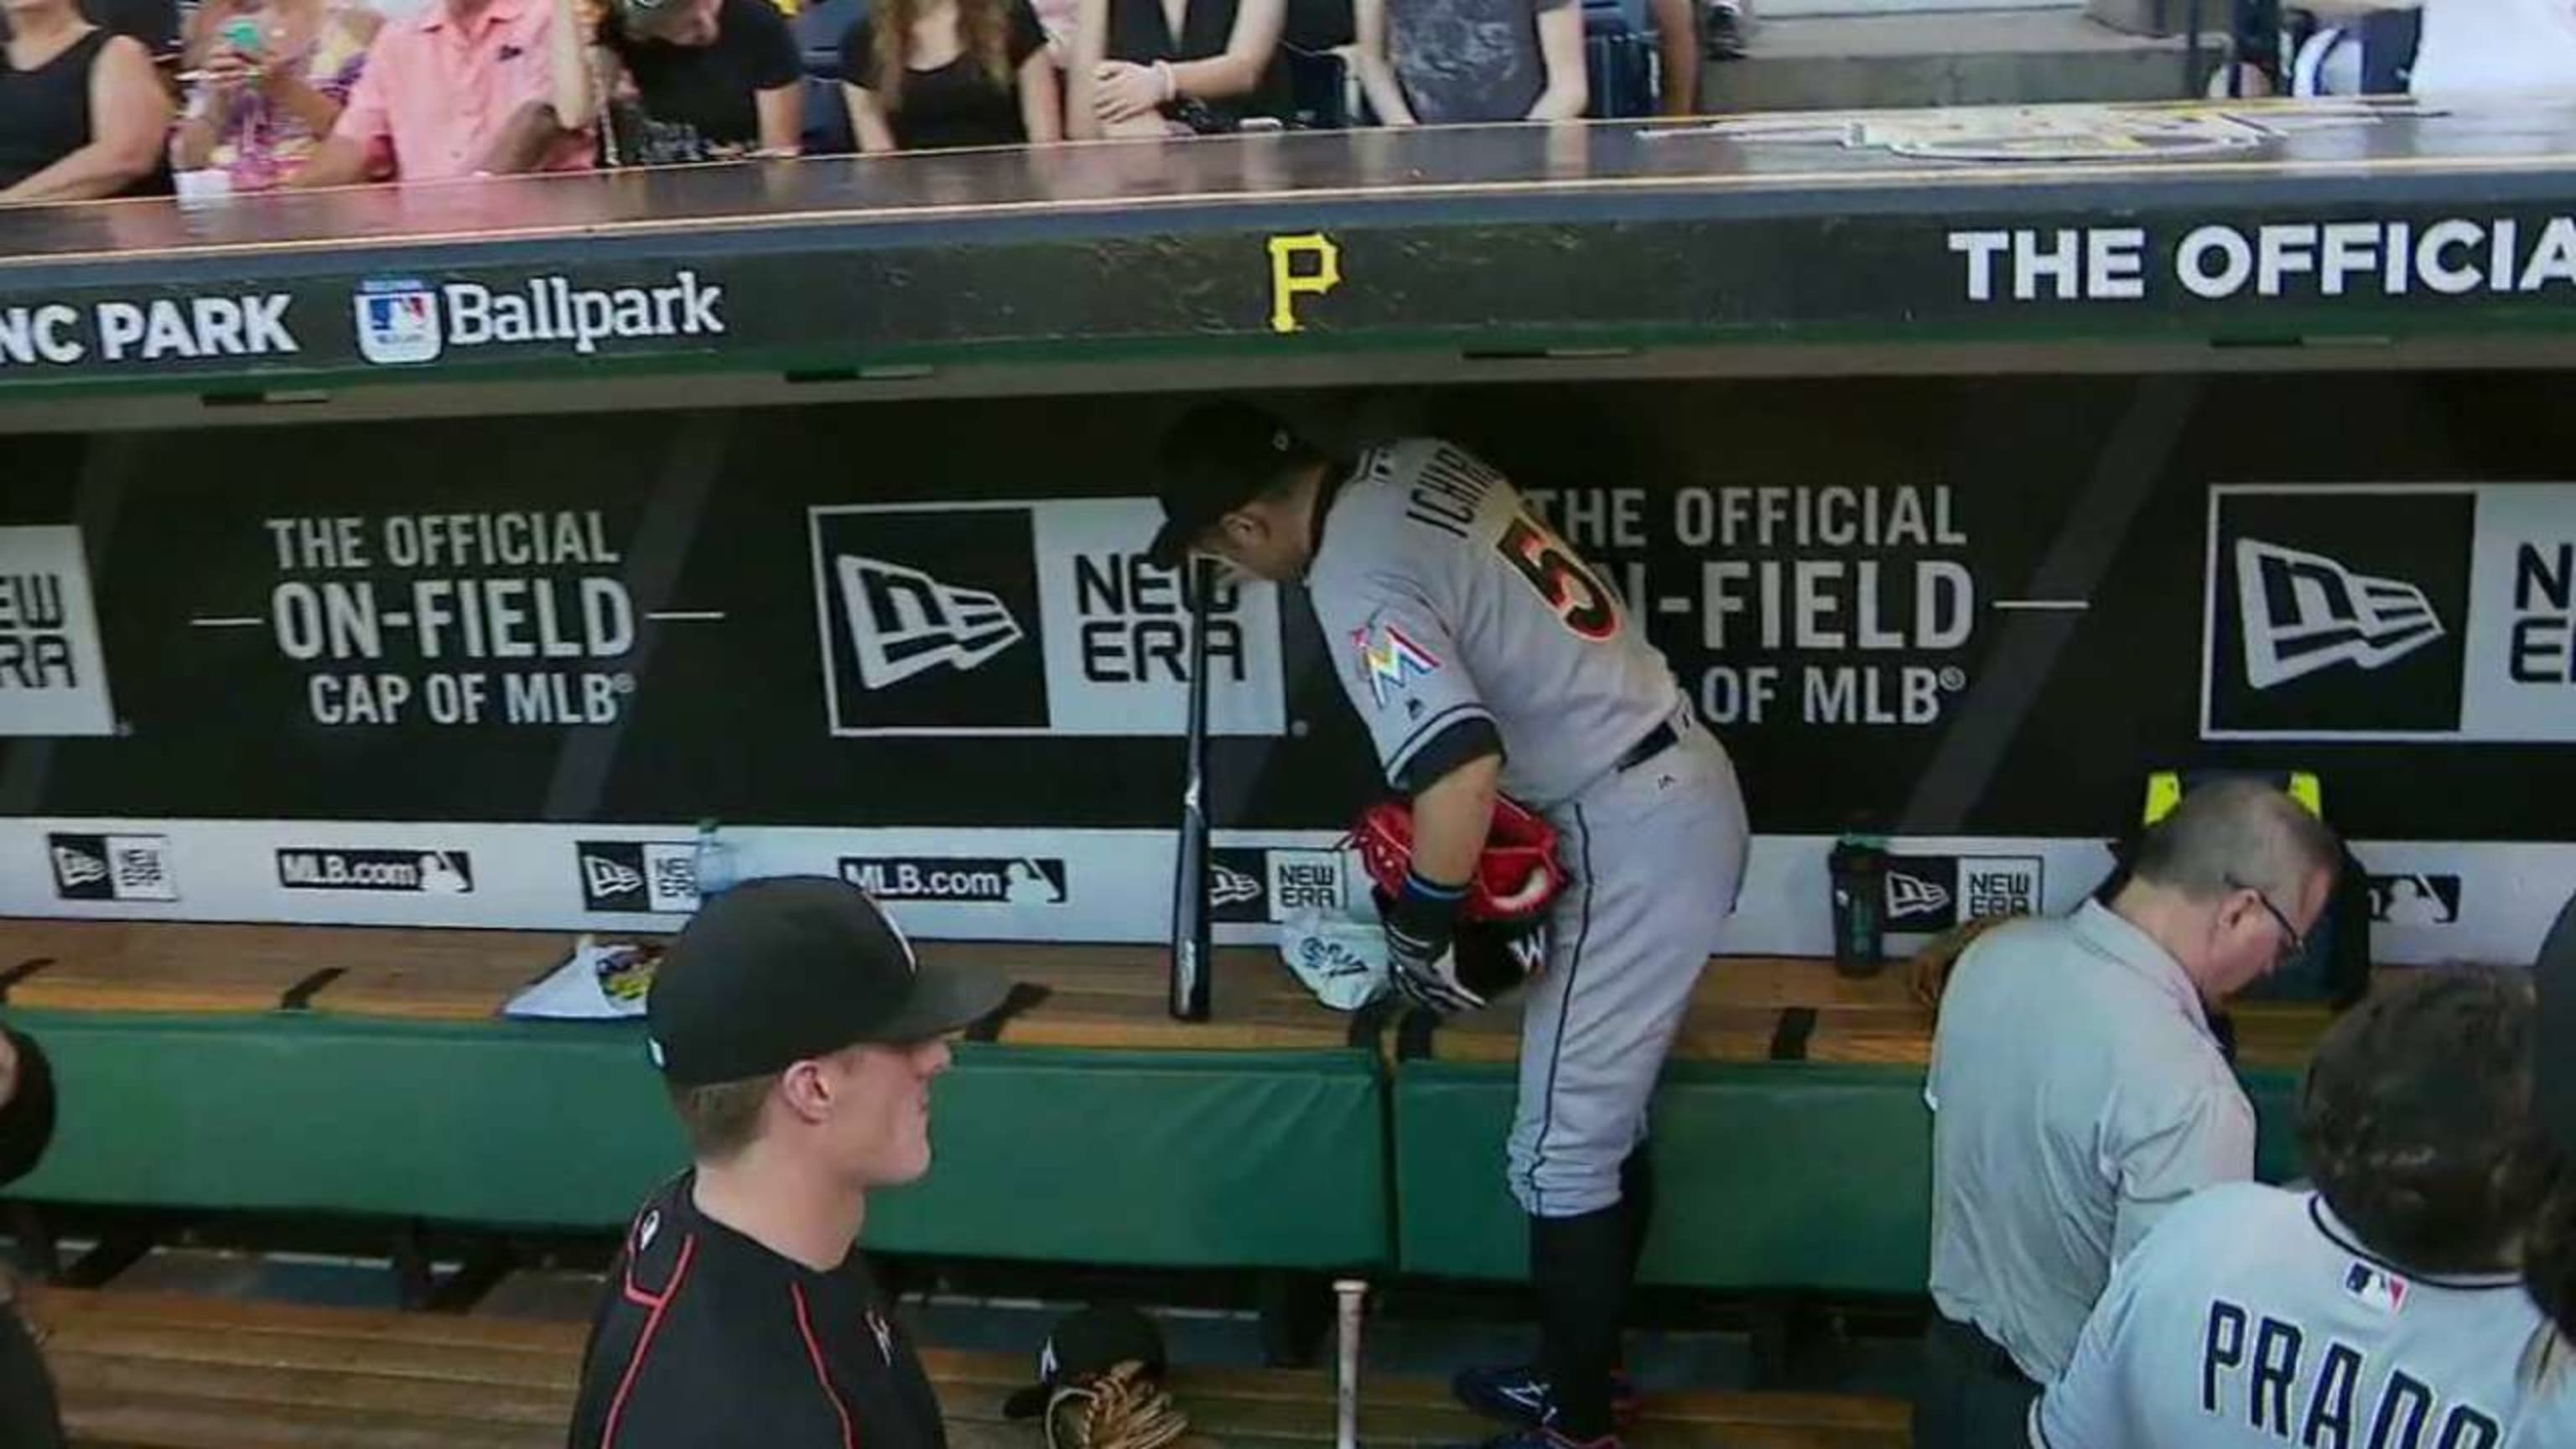 Watch Ichiro treat his baseball bat with as much care as most